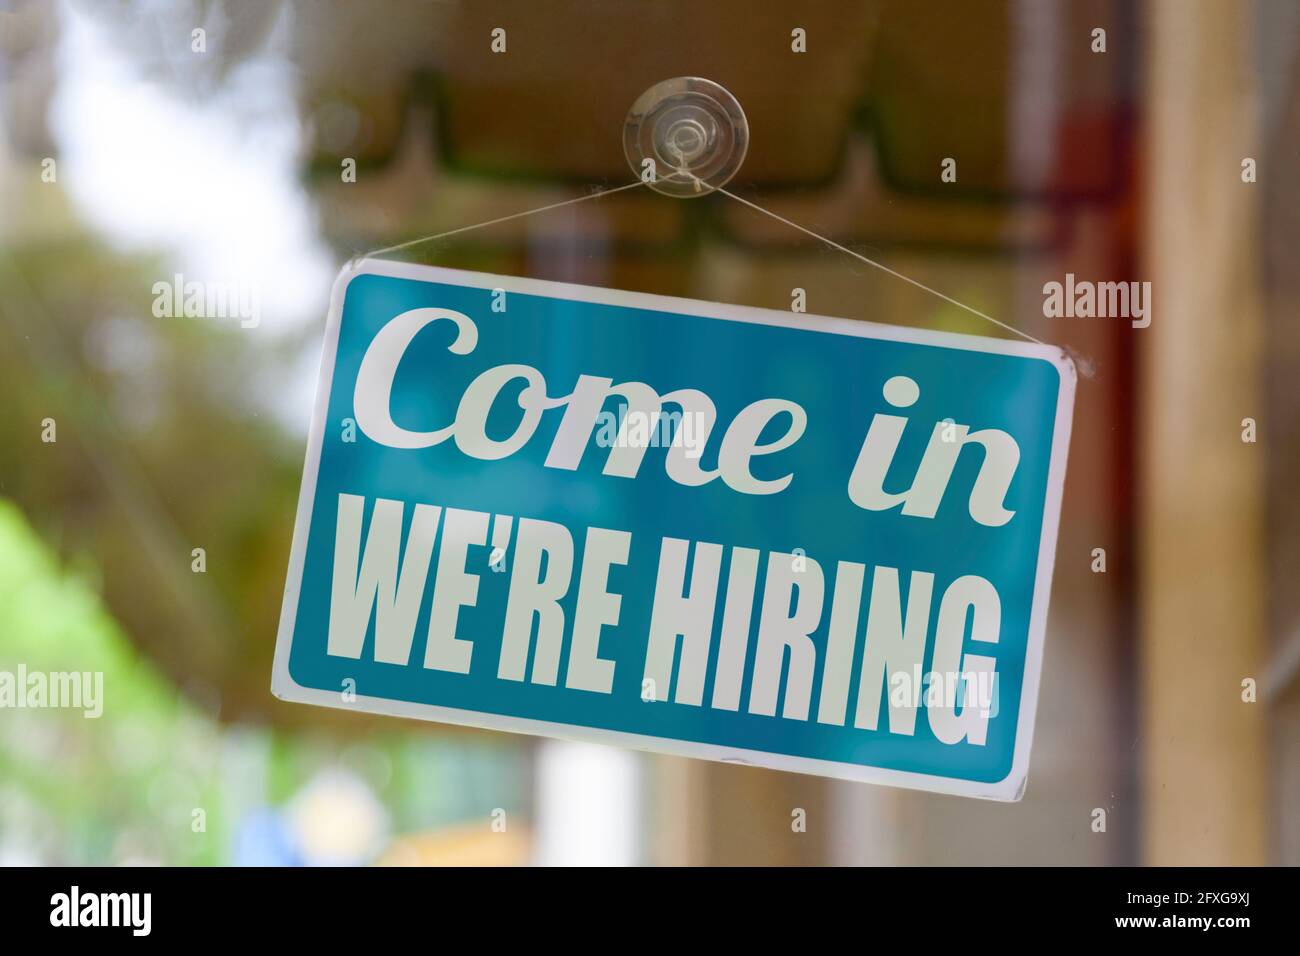 Close-up on a blue sign in the window of a shop displaying the message: Come in we're hiring. Stock Photo